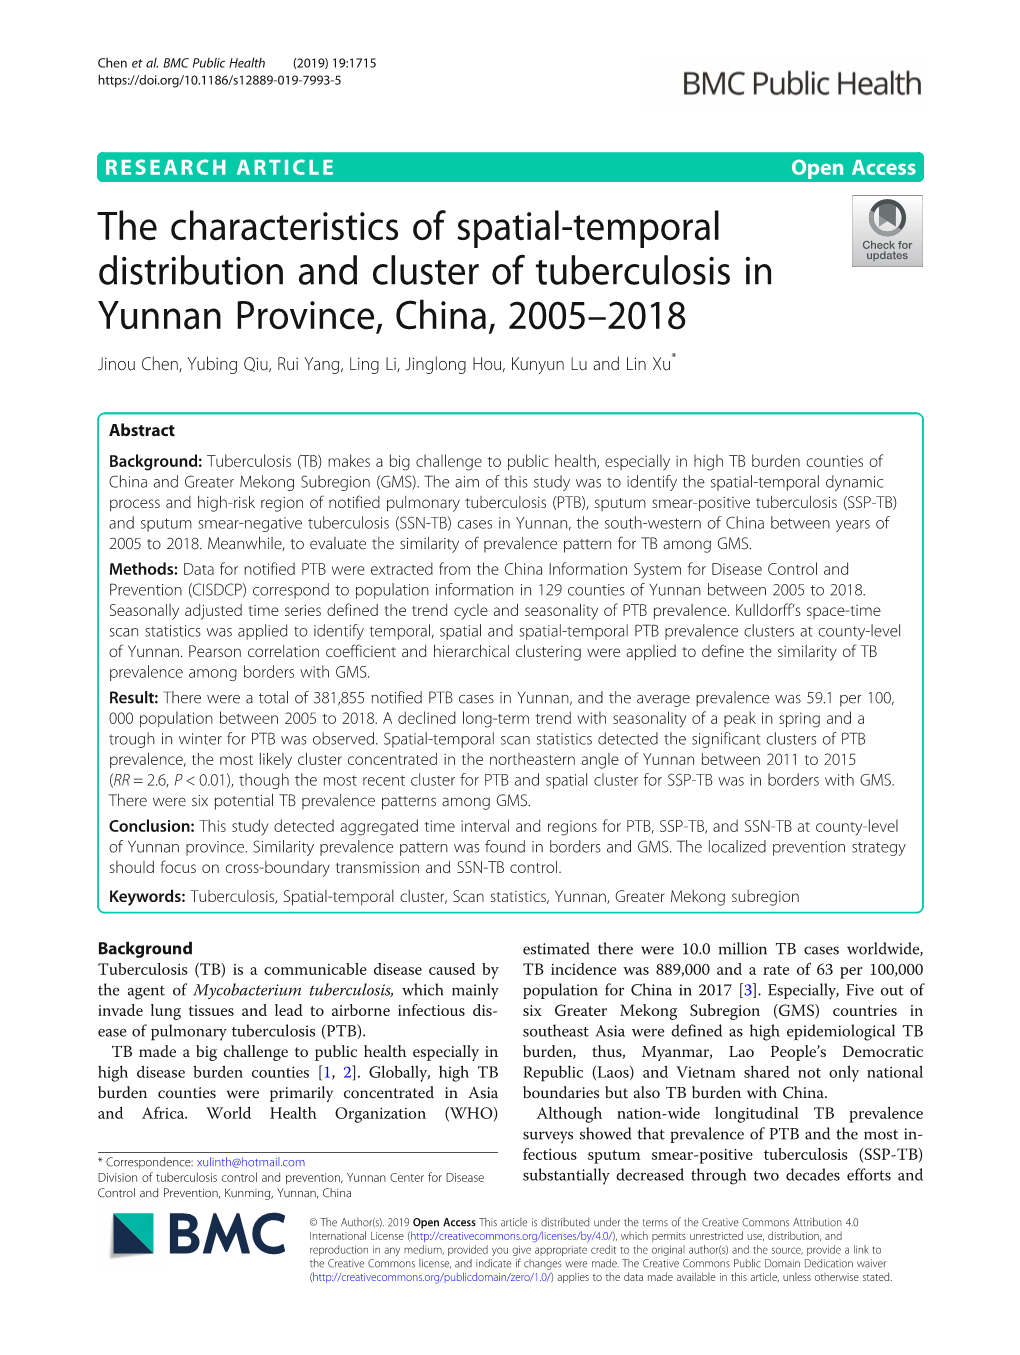 The Characteristics of Spatial-Temporal Distribution and Cluster Of